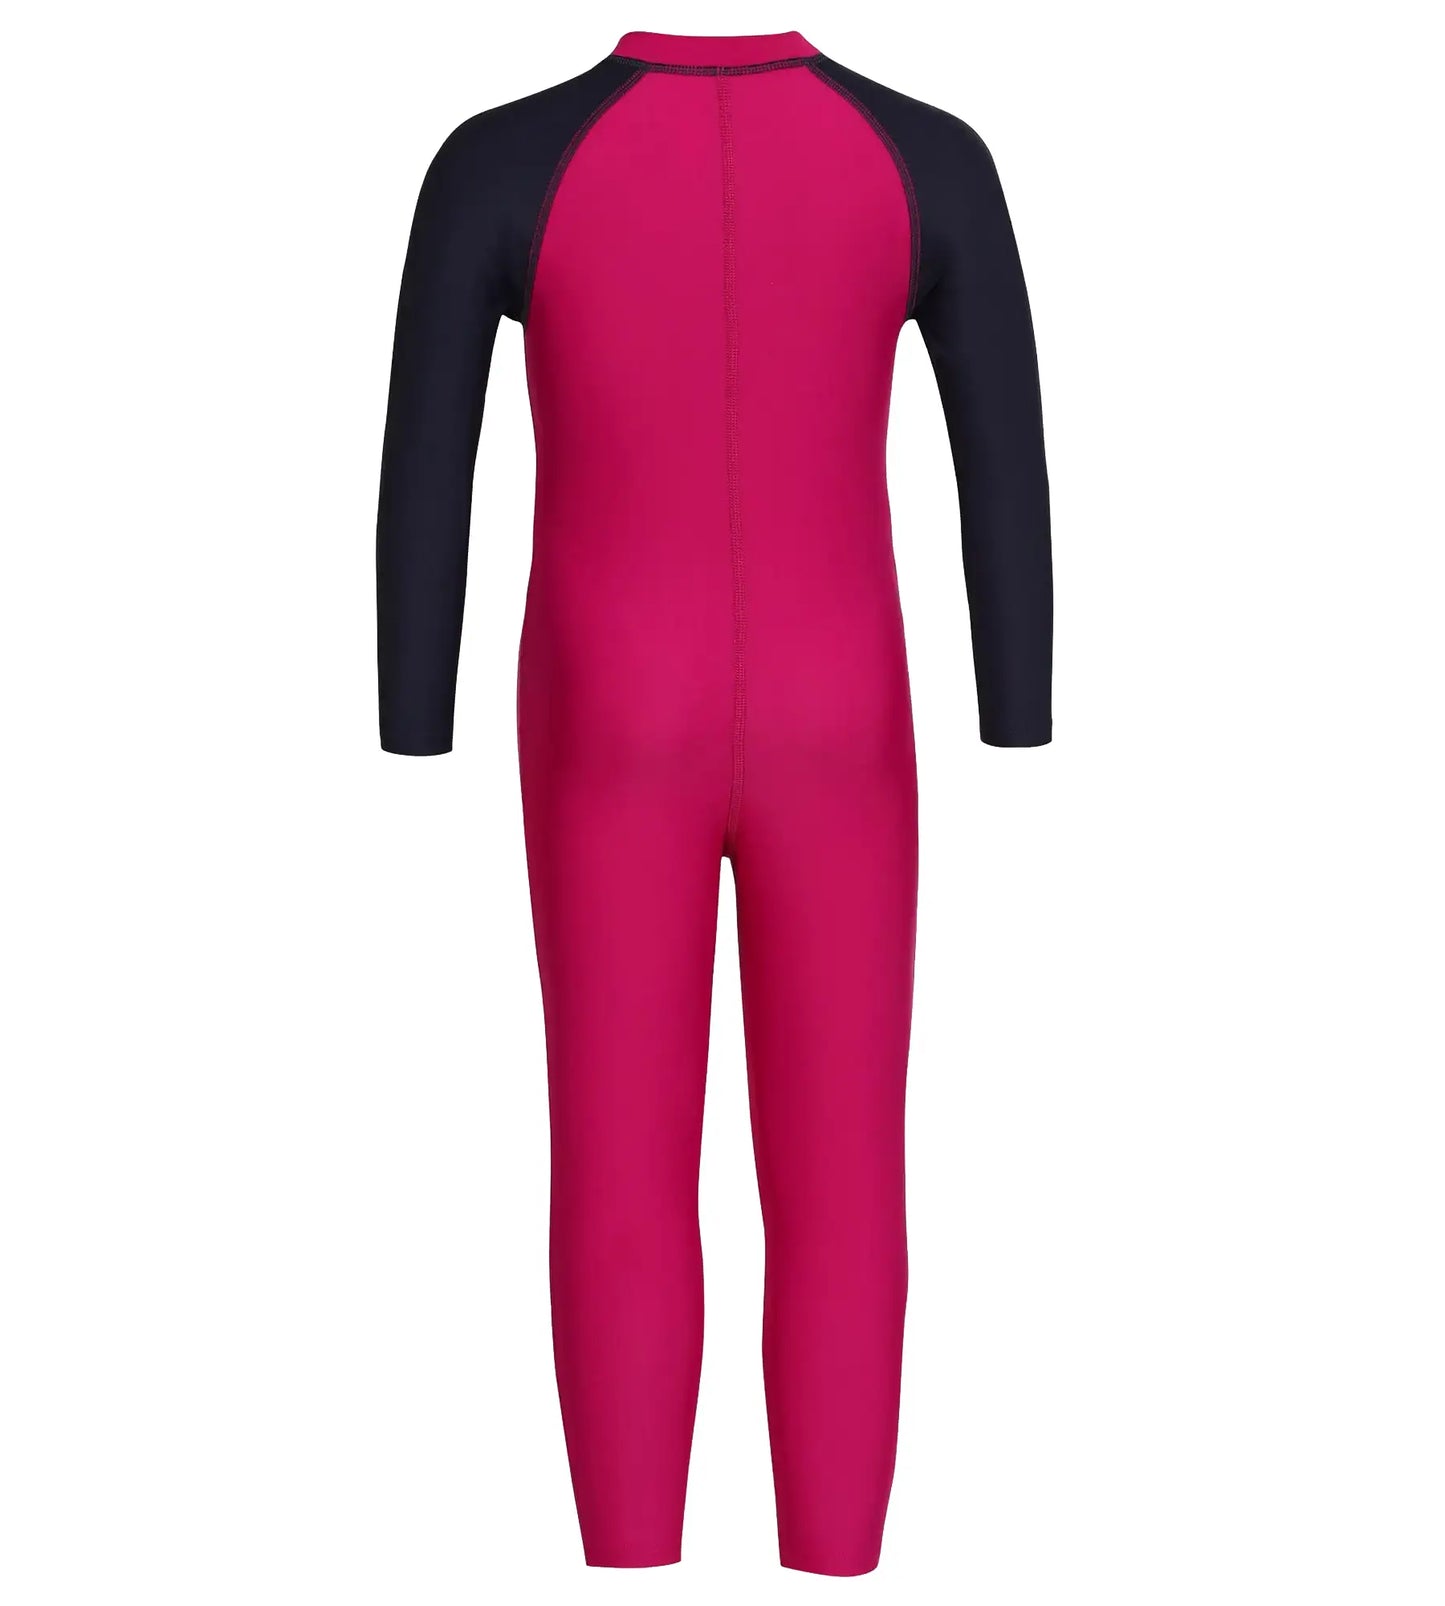 Tots Unisex Endurance 10 All In One Full Body Suit For Boys and Girls - Berry & True Navy